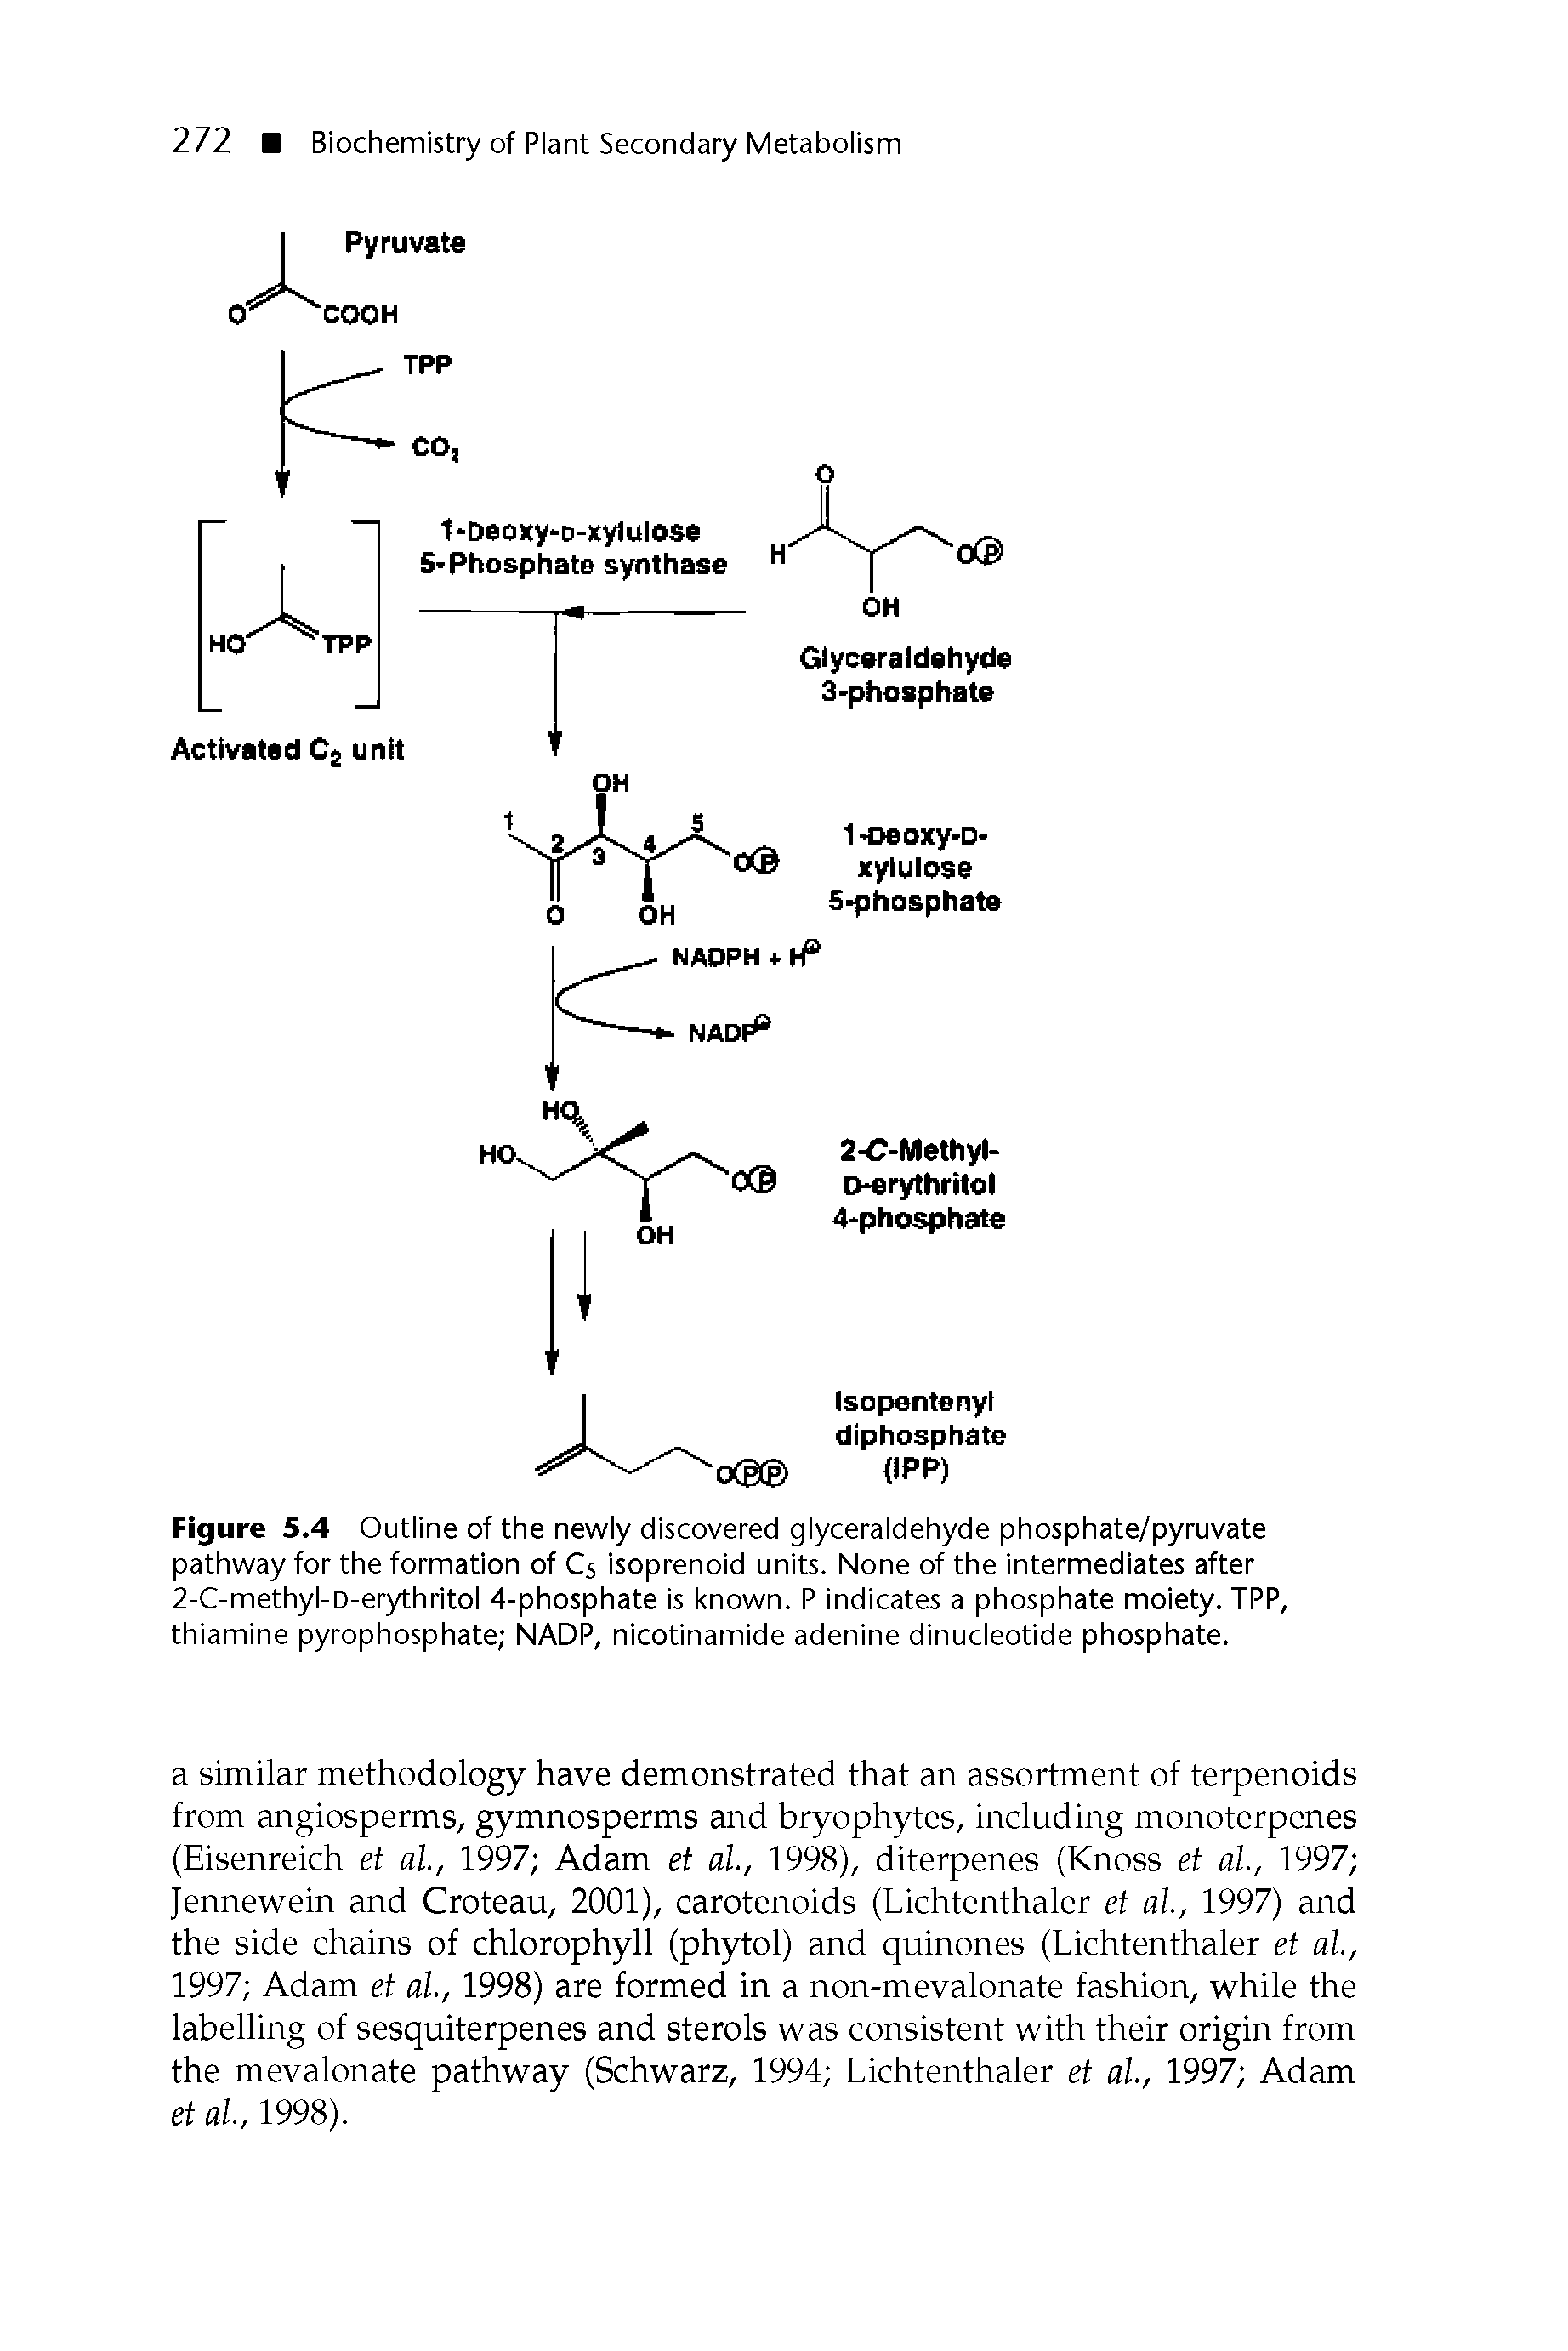 Figure 5.4 Outline of the newly discovered glyceraldehyde phosphate/pyruvate pathway for the formation of C5 isoprenoid units. None of the intermediates after 2-C-methyl-D-erythritol 4-phosphate is known. P indicates a phosphate moiety. TPP, thiamine pyrophosphate NADP, nicotinamide adenine dinucleotide phosphate.